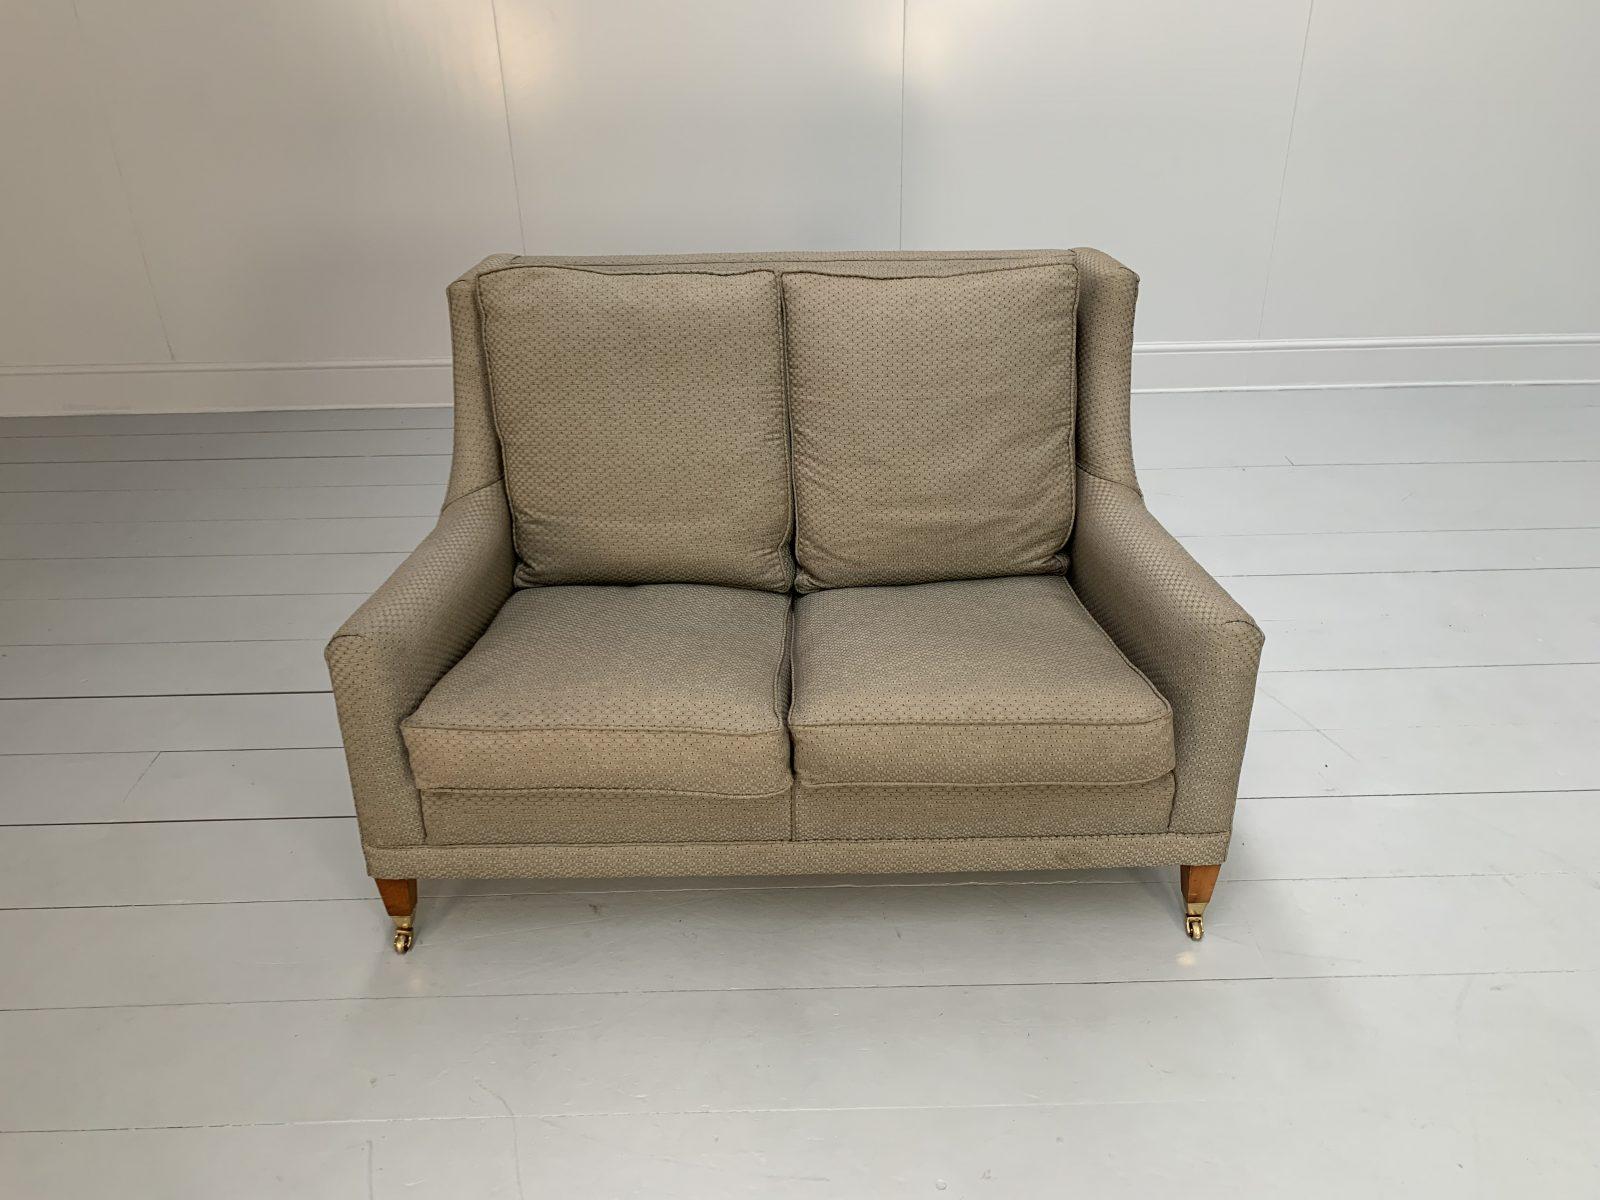 Duresta “Emma” 2-Seat Sofa – In Pale-Gold & Duck-Egg Blue Fabric In Good Condition For Sale In Barrowford, GB